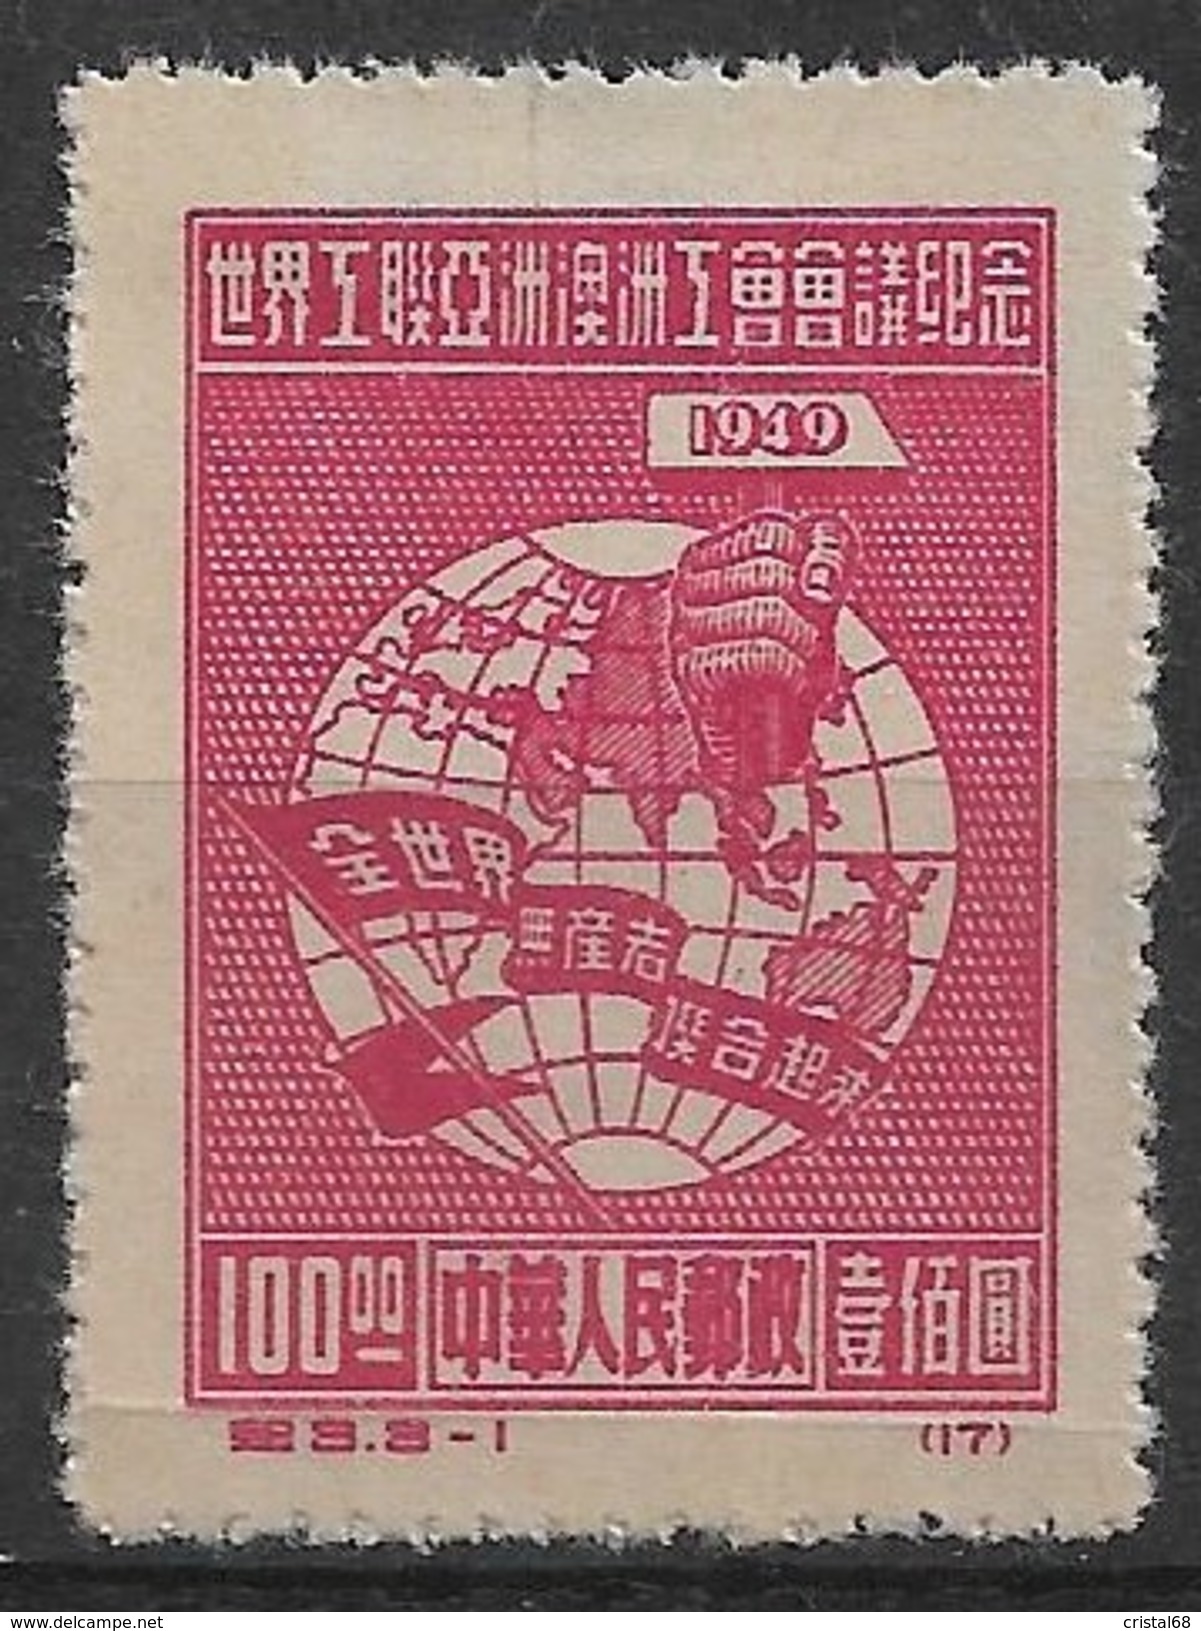 CHINE 1949 - Timbre N°824 - Neuf - Official Reprints